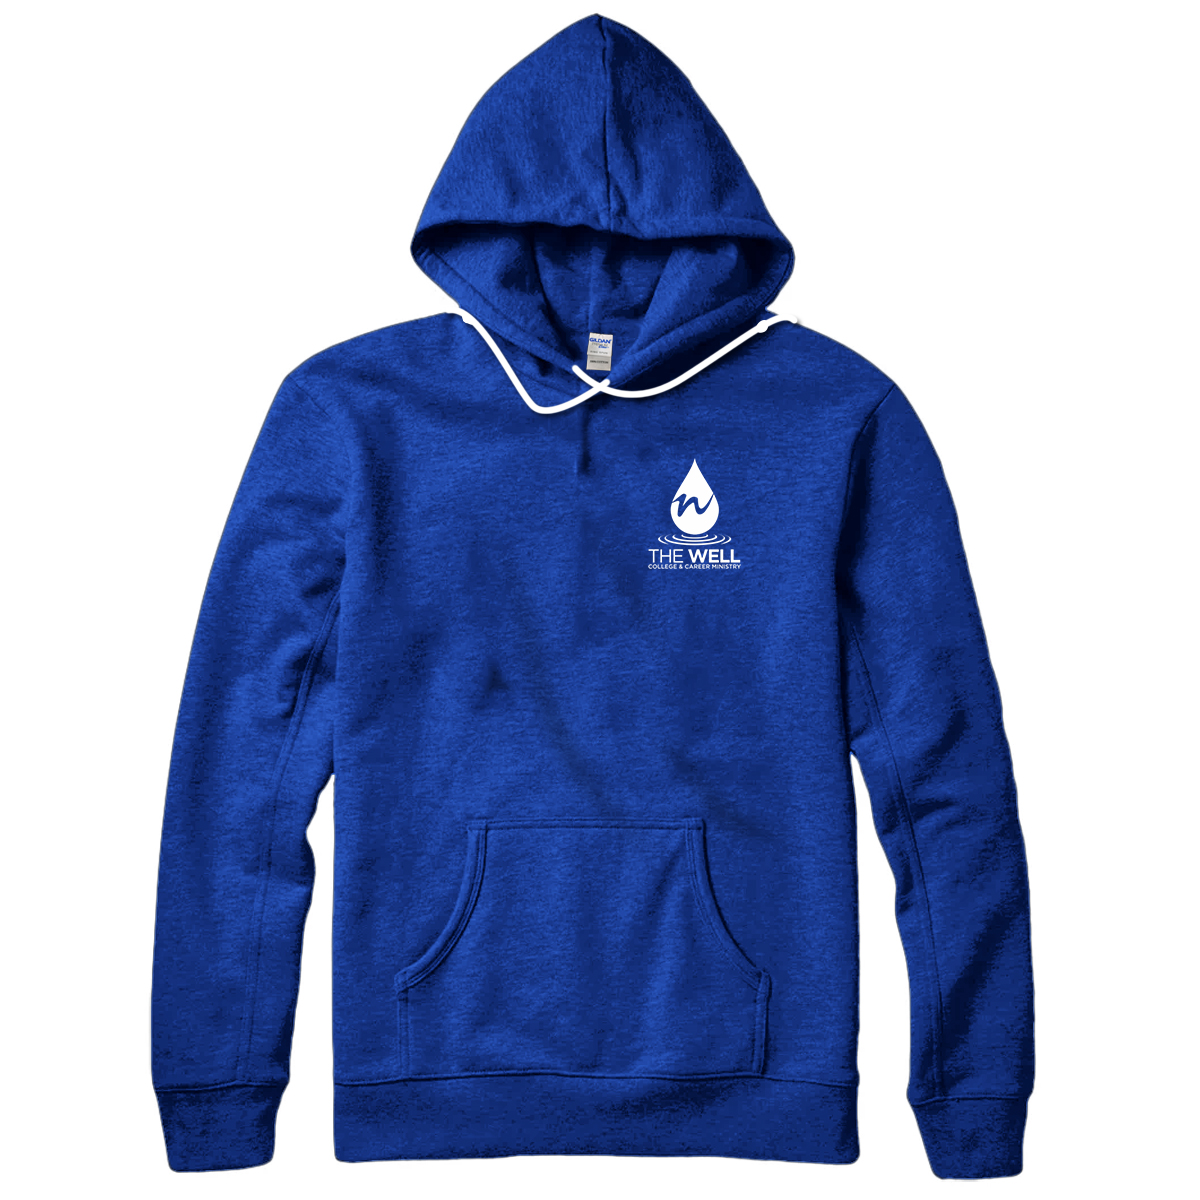 The Well Logo Pullover Hoodie - All Star Shirt